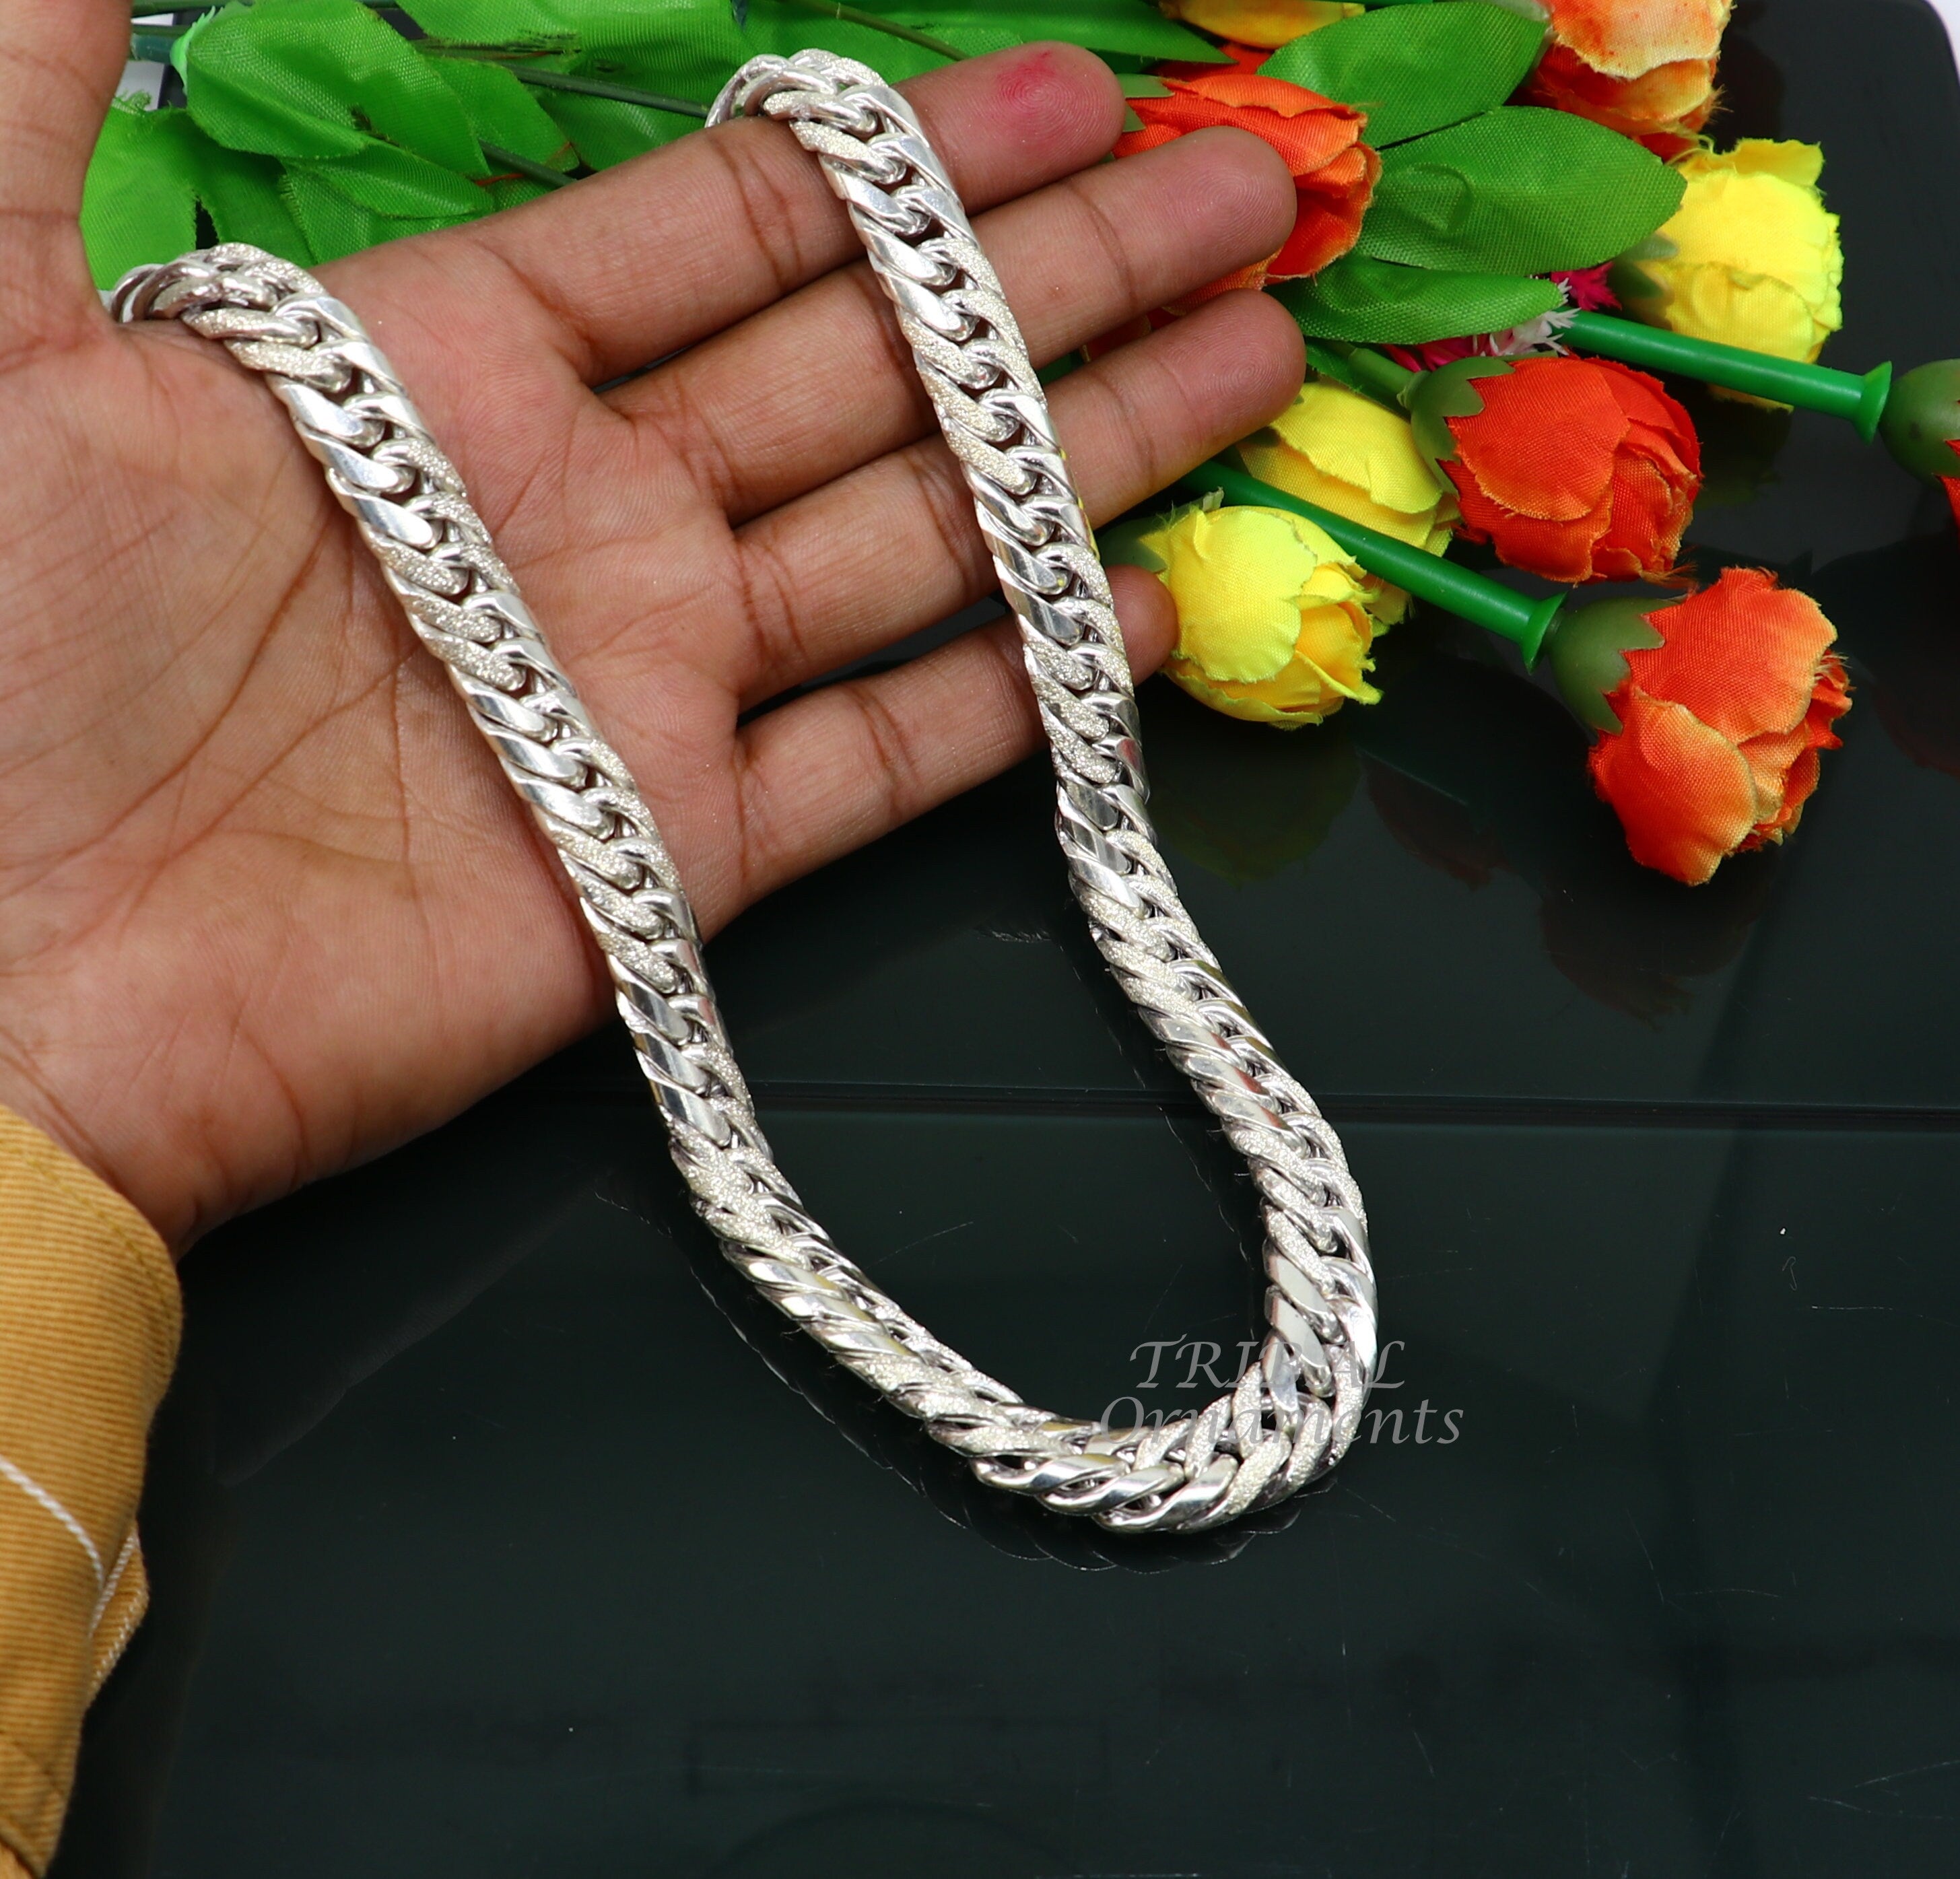 Silver Chains for Men: 5 Best Silver Chains for Men - The Economic Times